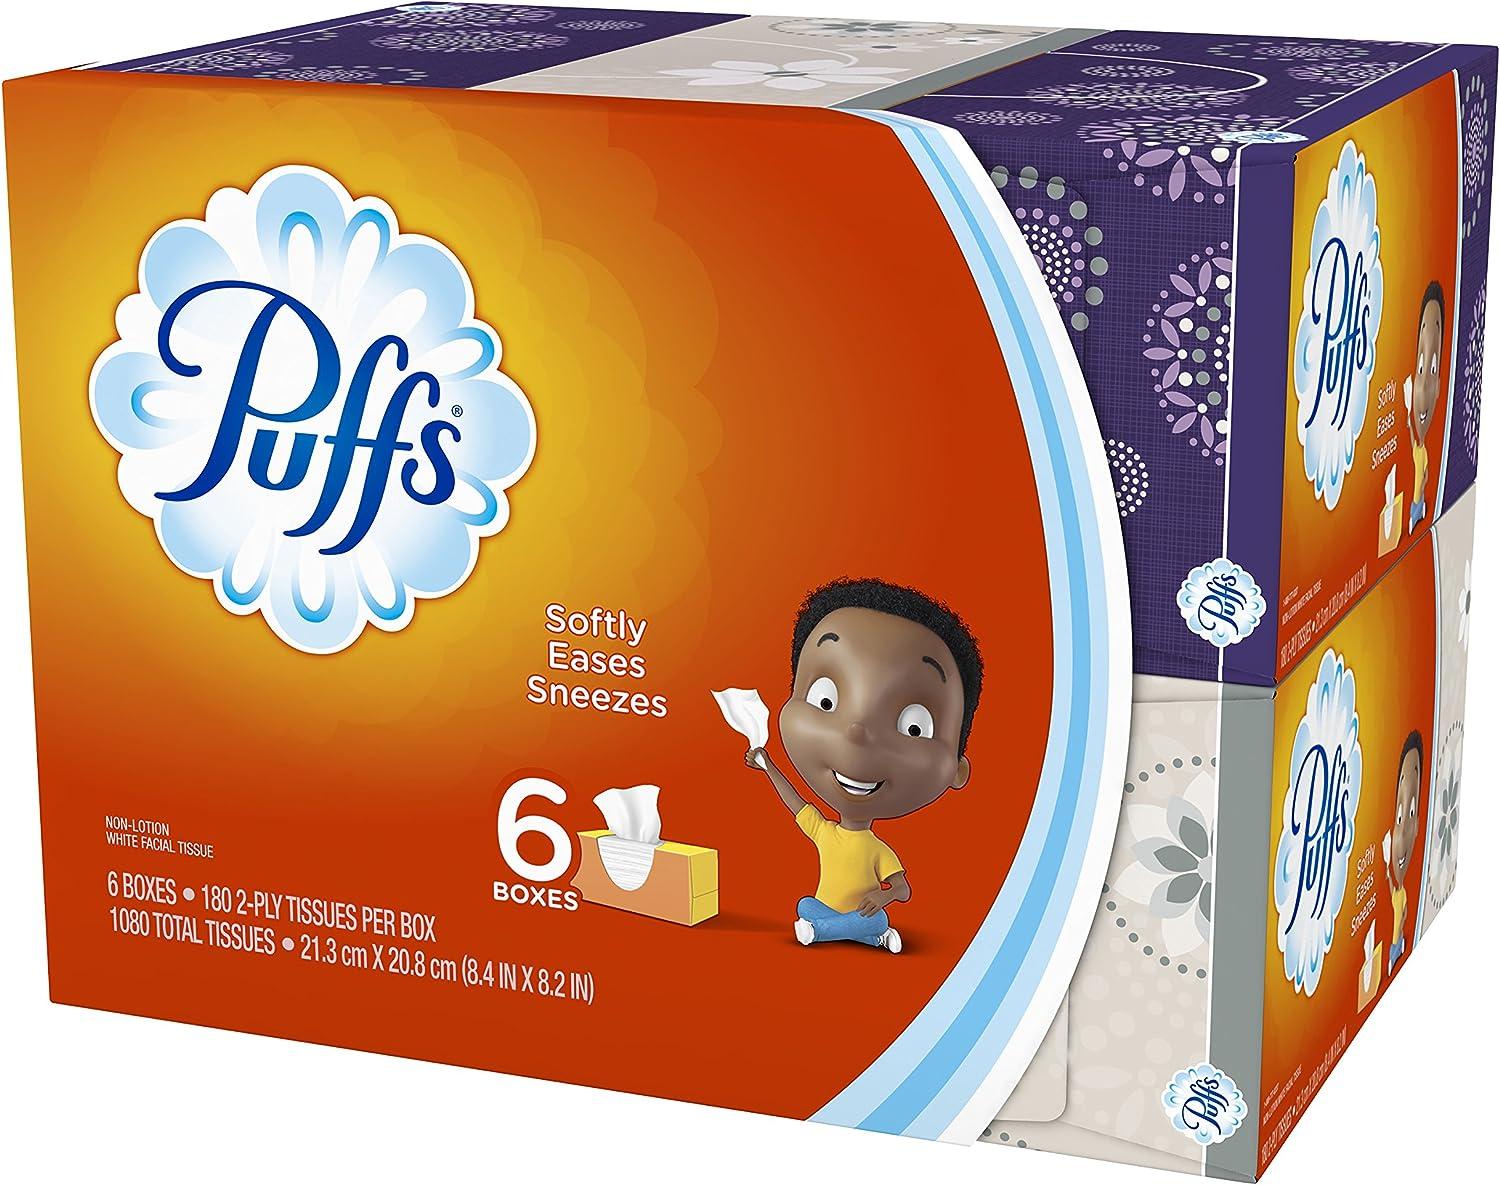 Puffs Plus Lotion Facial Tissues on Sale (Great for Back to School!)